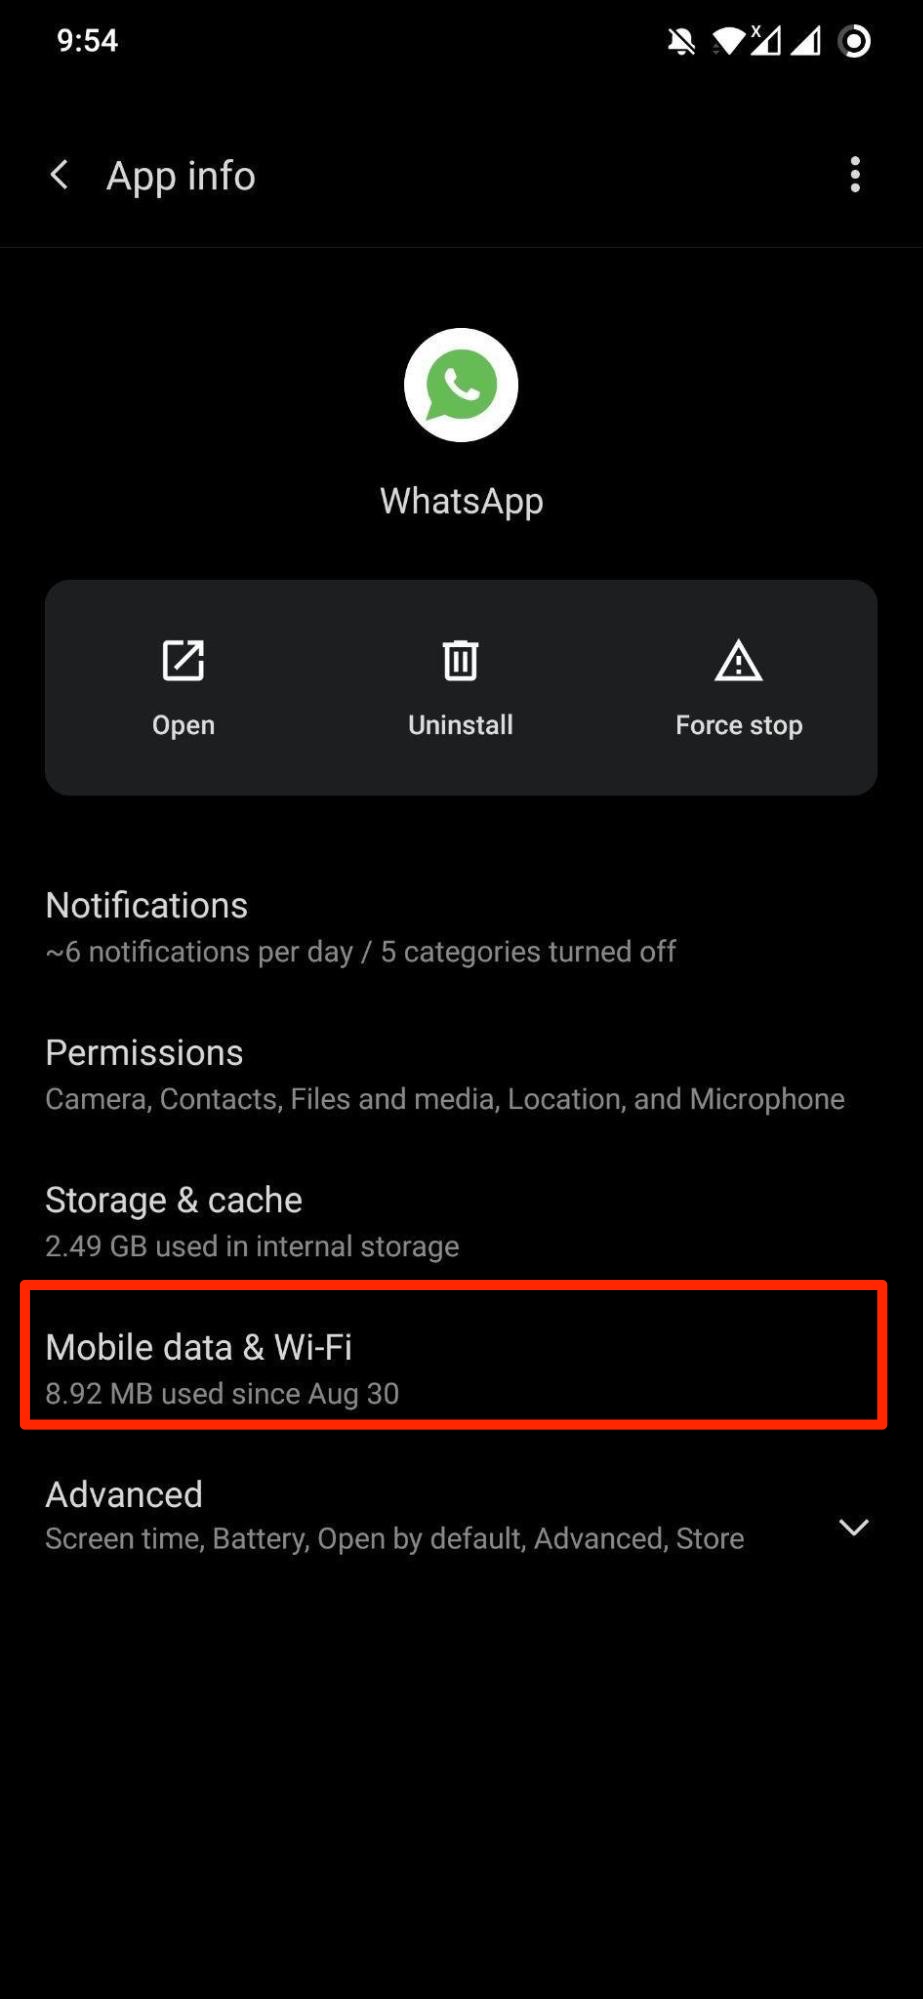 Mobile Data and WiFi